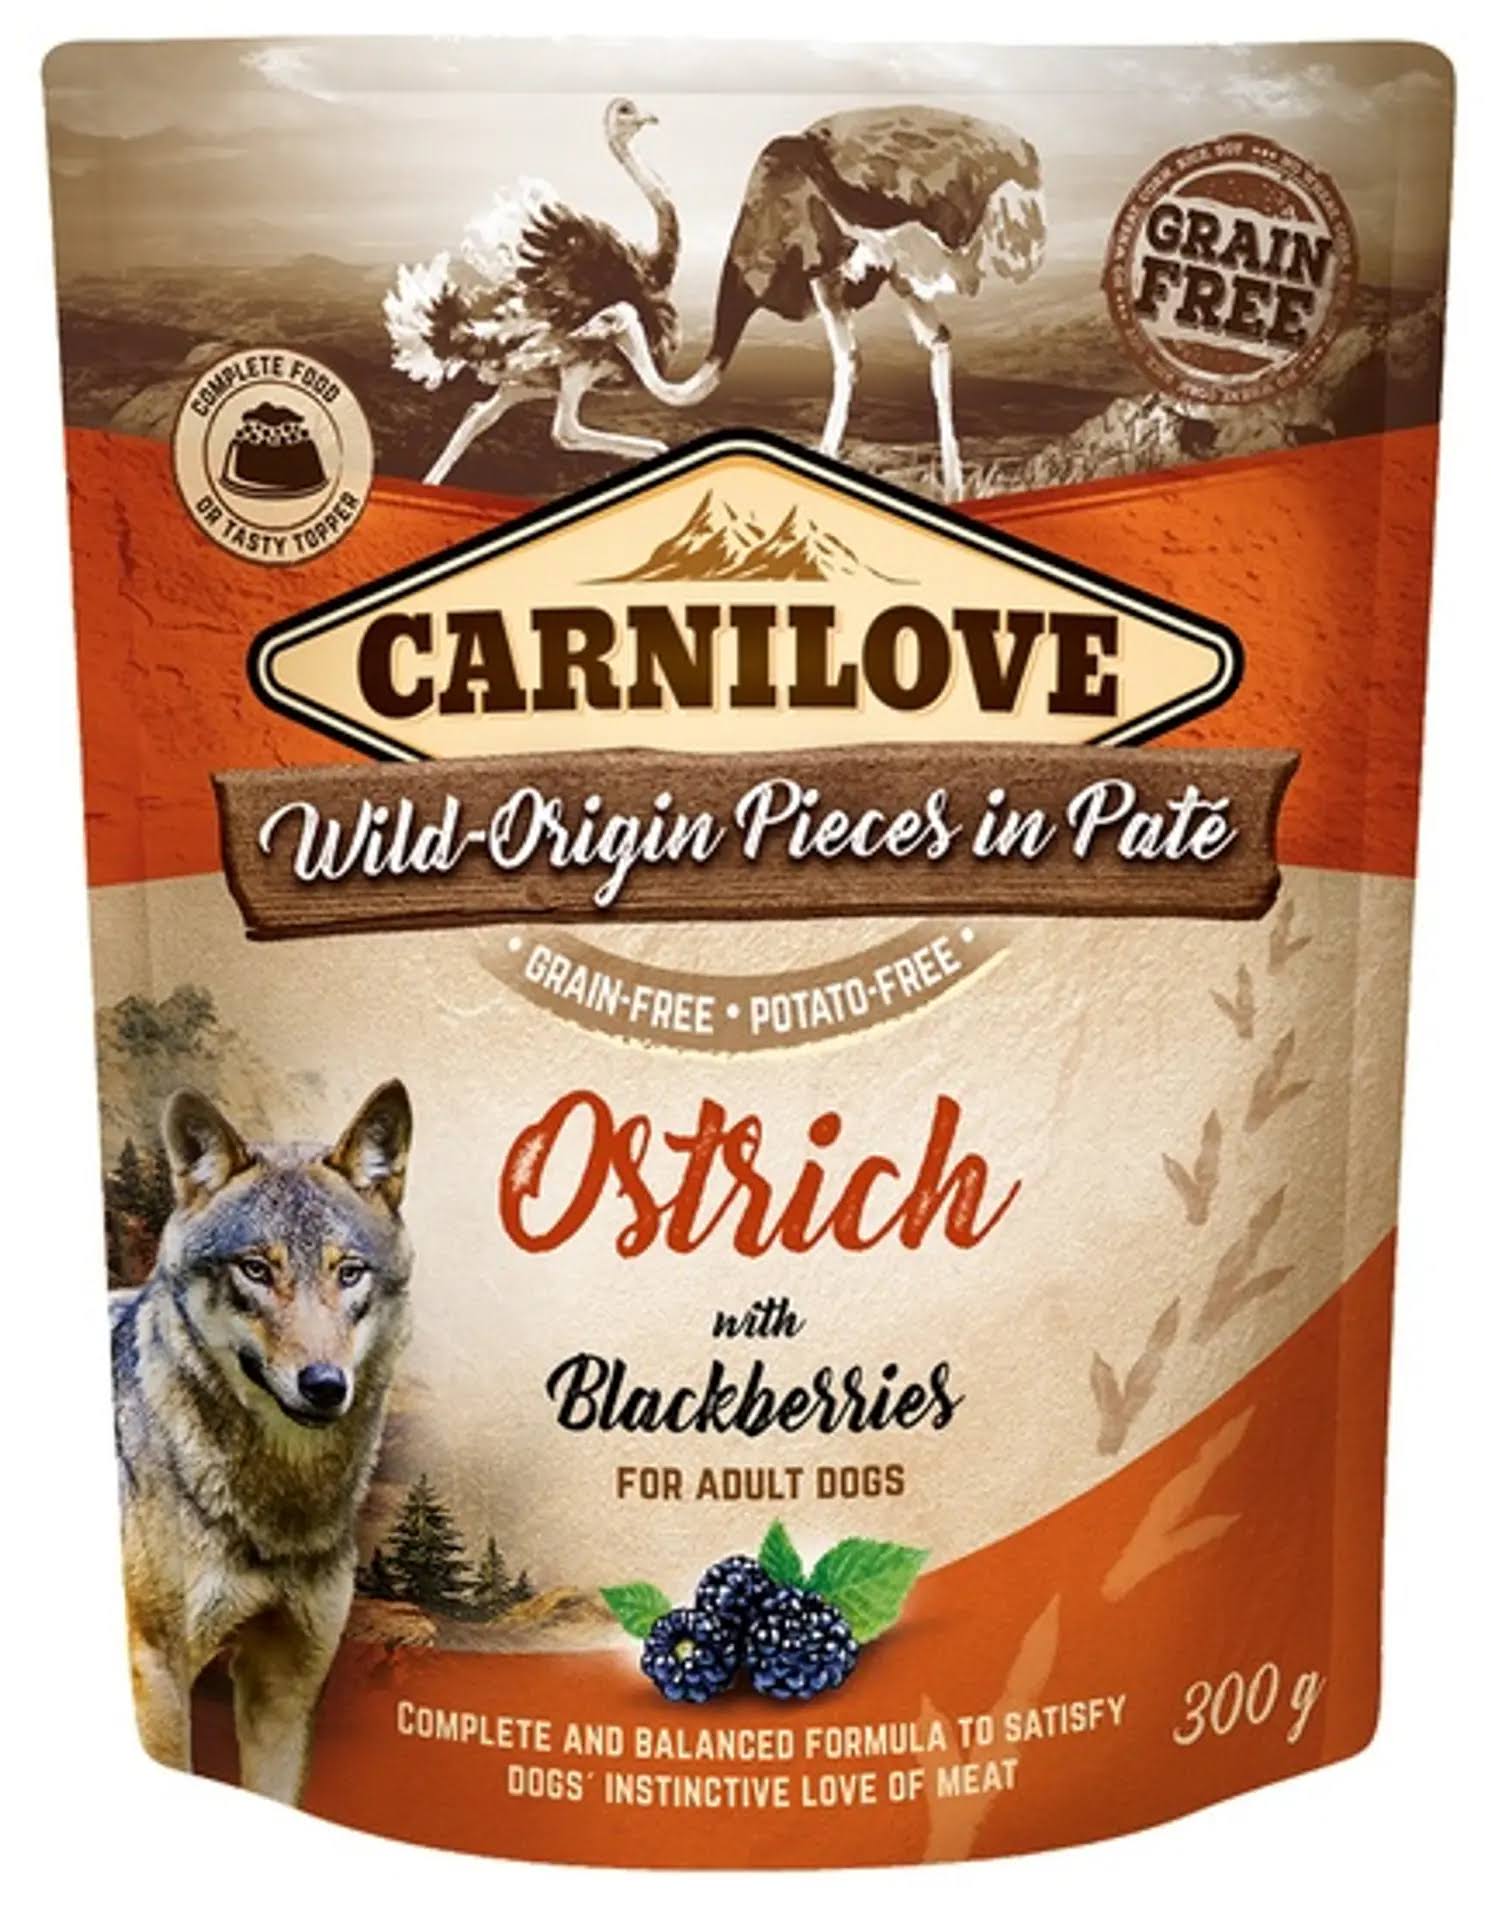 Carnilove Dog Pouch Ostrich With Blackberries - 300g